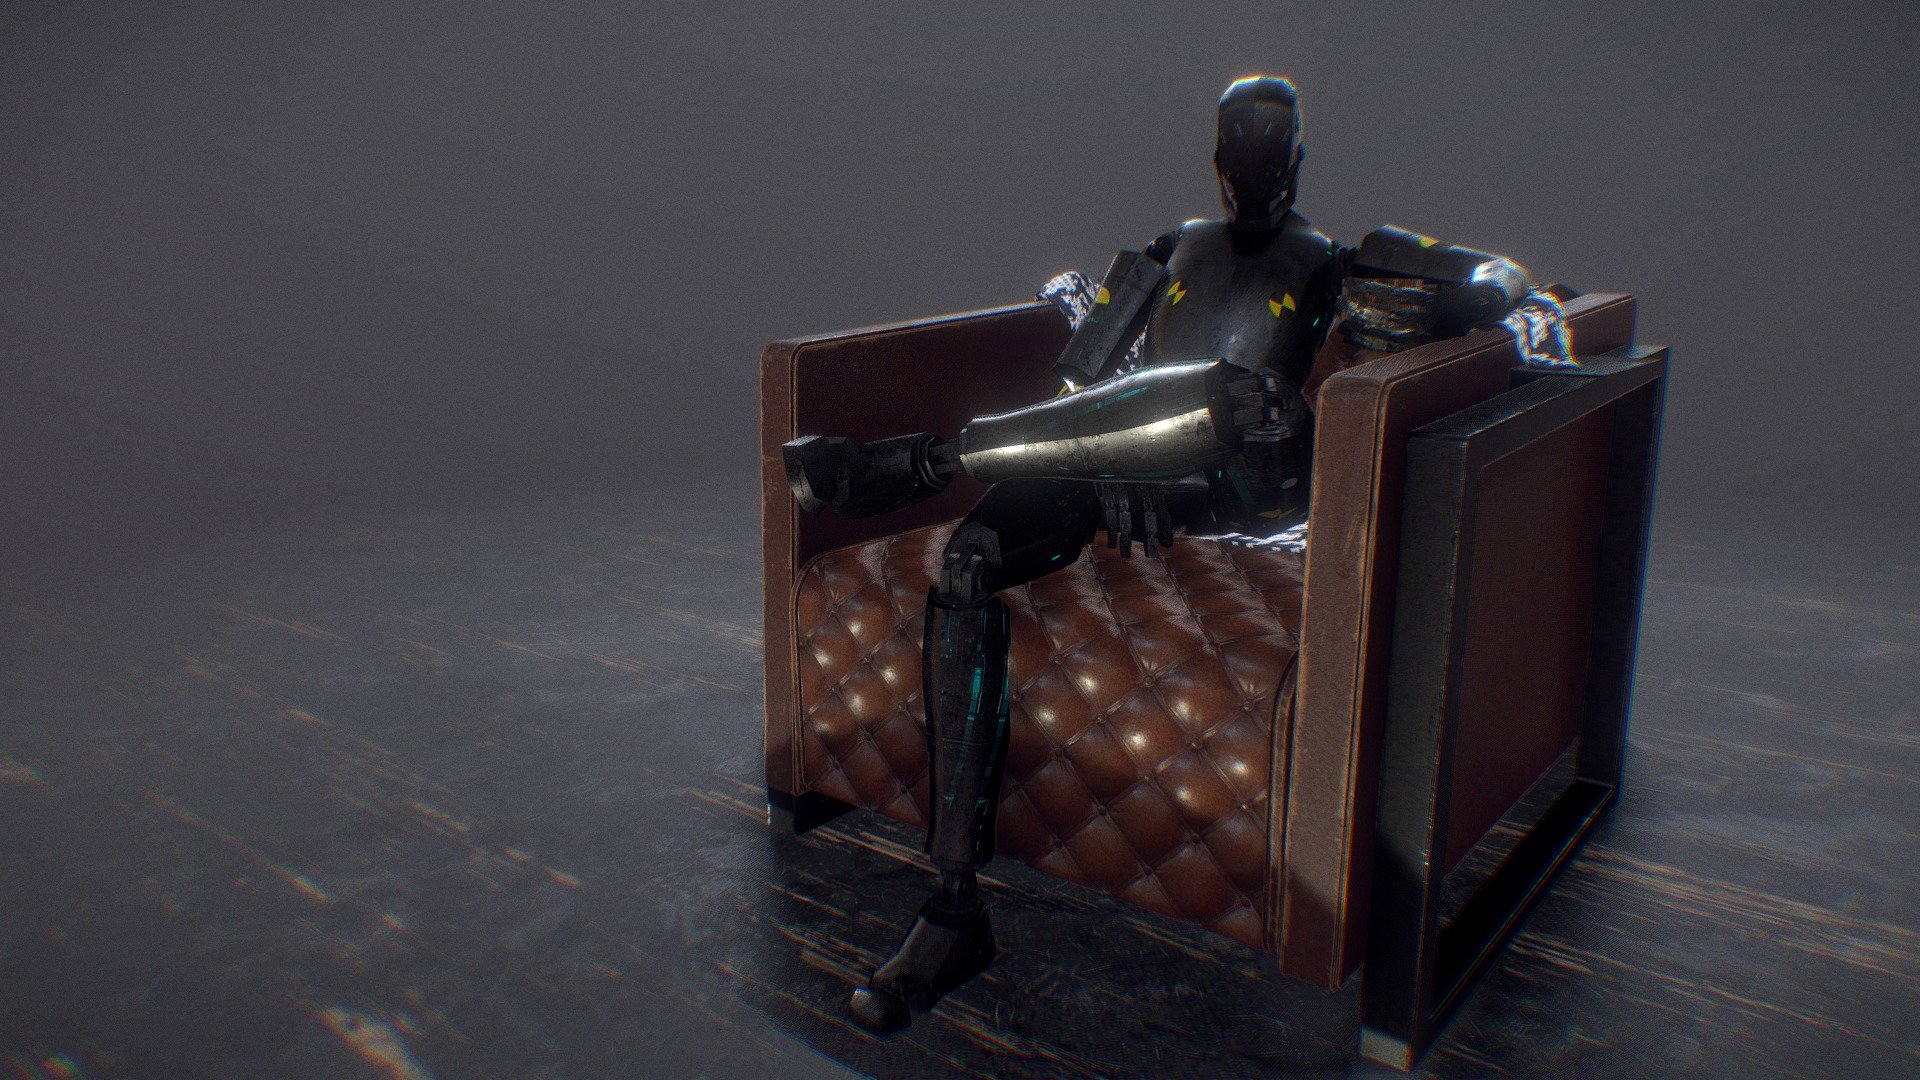 A piece of furniture for sitting or reclining

Models included: Mannequin, Glass, Couch, Removable Cloth, Ground Plane. Separated and textured objects. Ready to use.

Separate texture for each object. .obj, .fbx and *.blend included in the aditional final. The files are properly organized and ready.  I can also provide the Substance Painter File and bigger textures if needed.

Check my profile for free models https://sketchfab.com/re1monsen If you enjoy my work please consider supporting me.

Feel free to contact me. I’d love yo hear from you.

Thanks! - Classy Sofa / Couch 01 - Buy Royalty Free 3D model by re1monsen 3d model